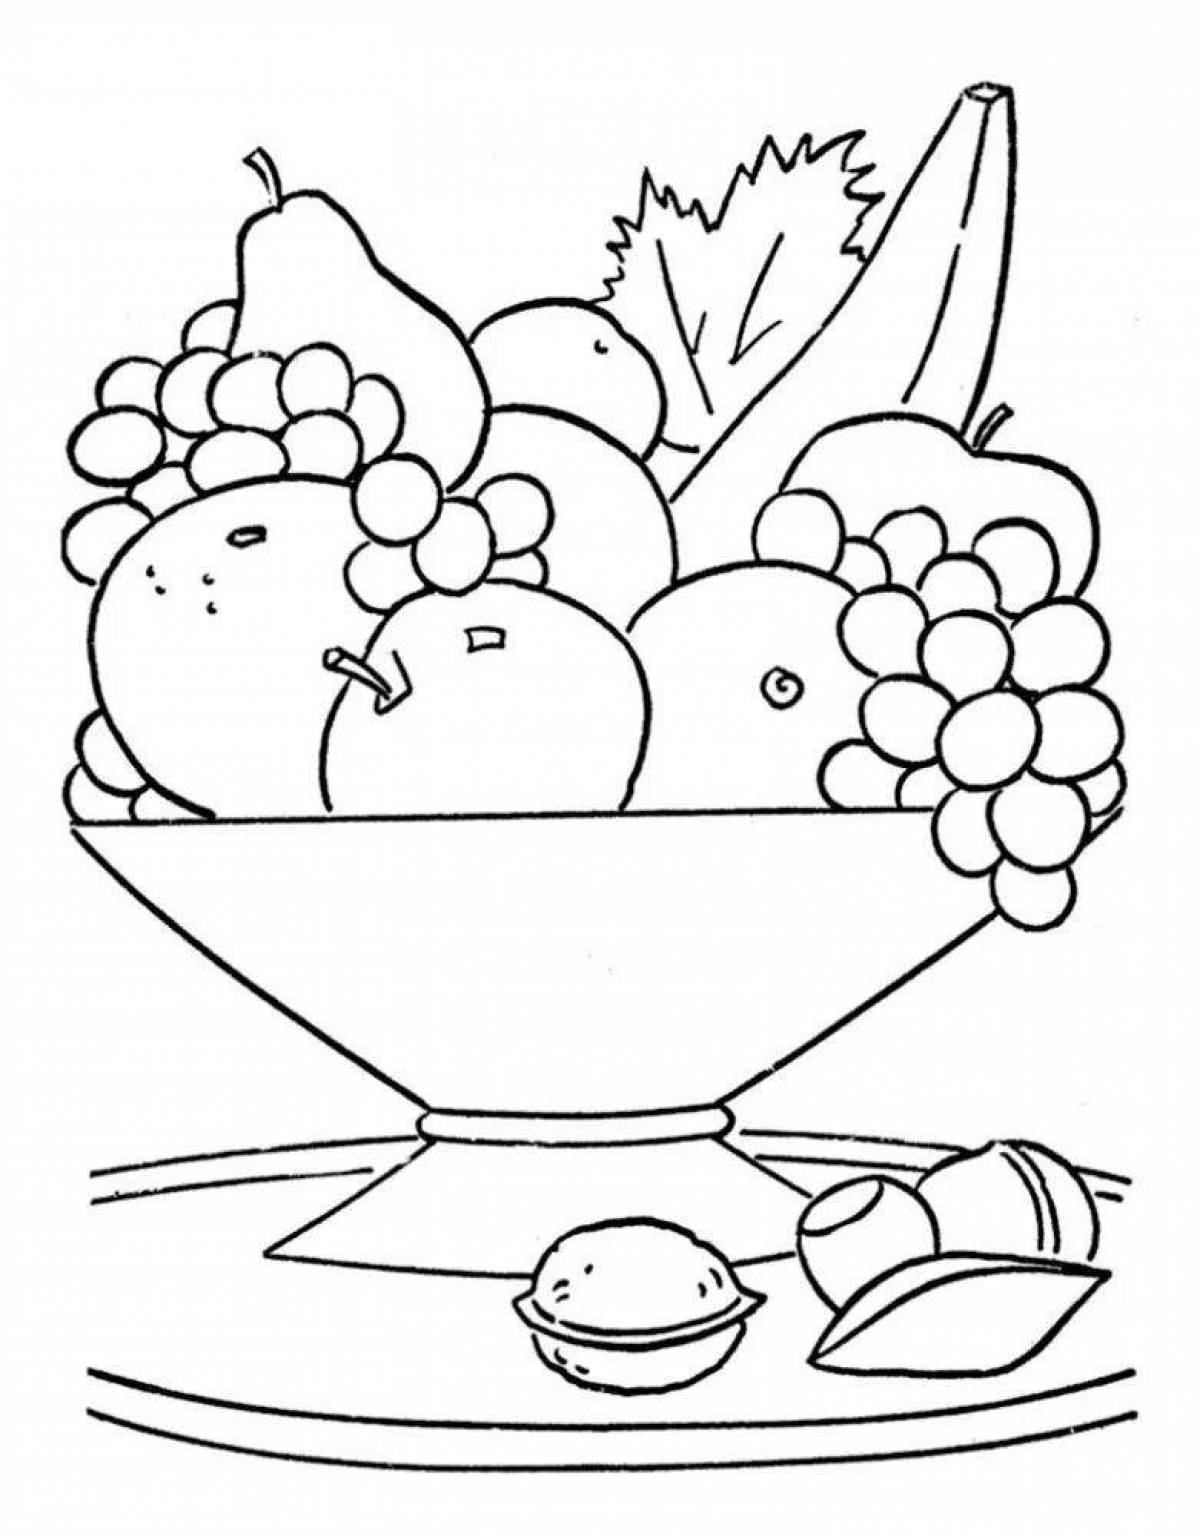 Still life with fruit and vase #7